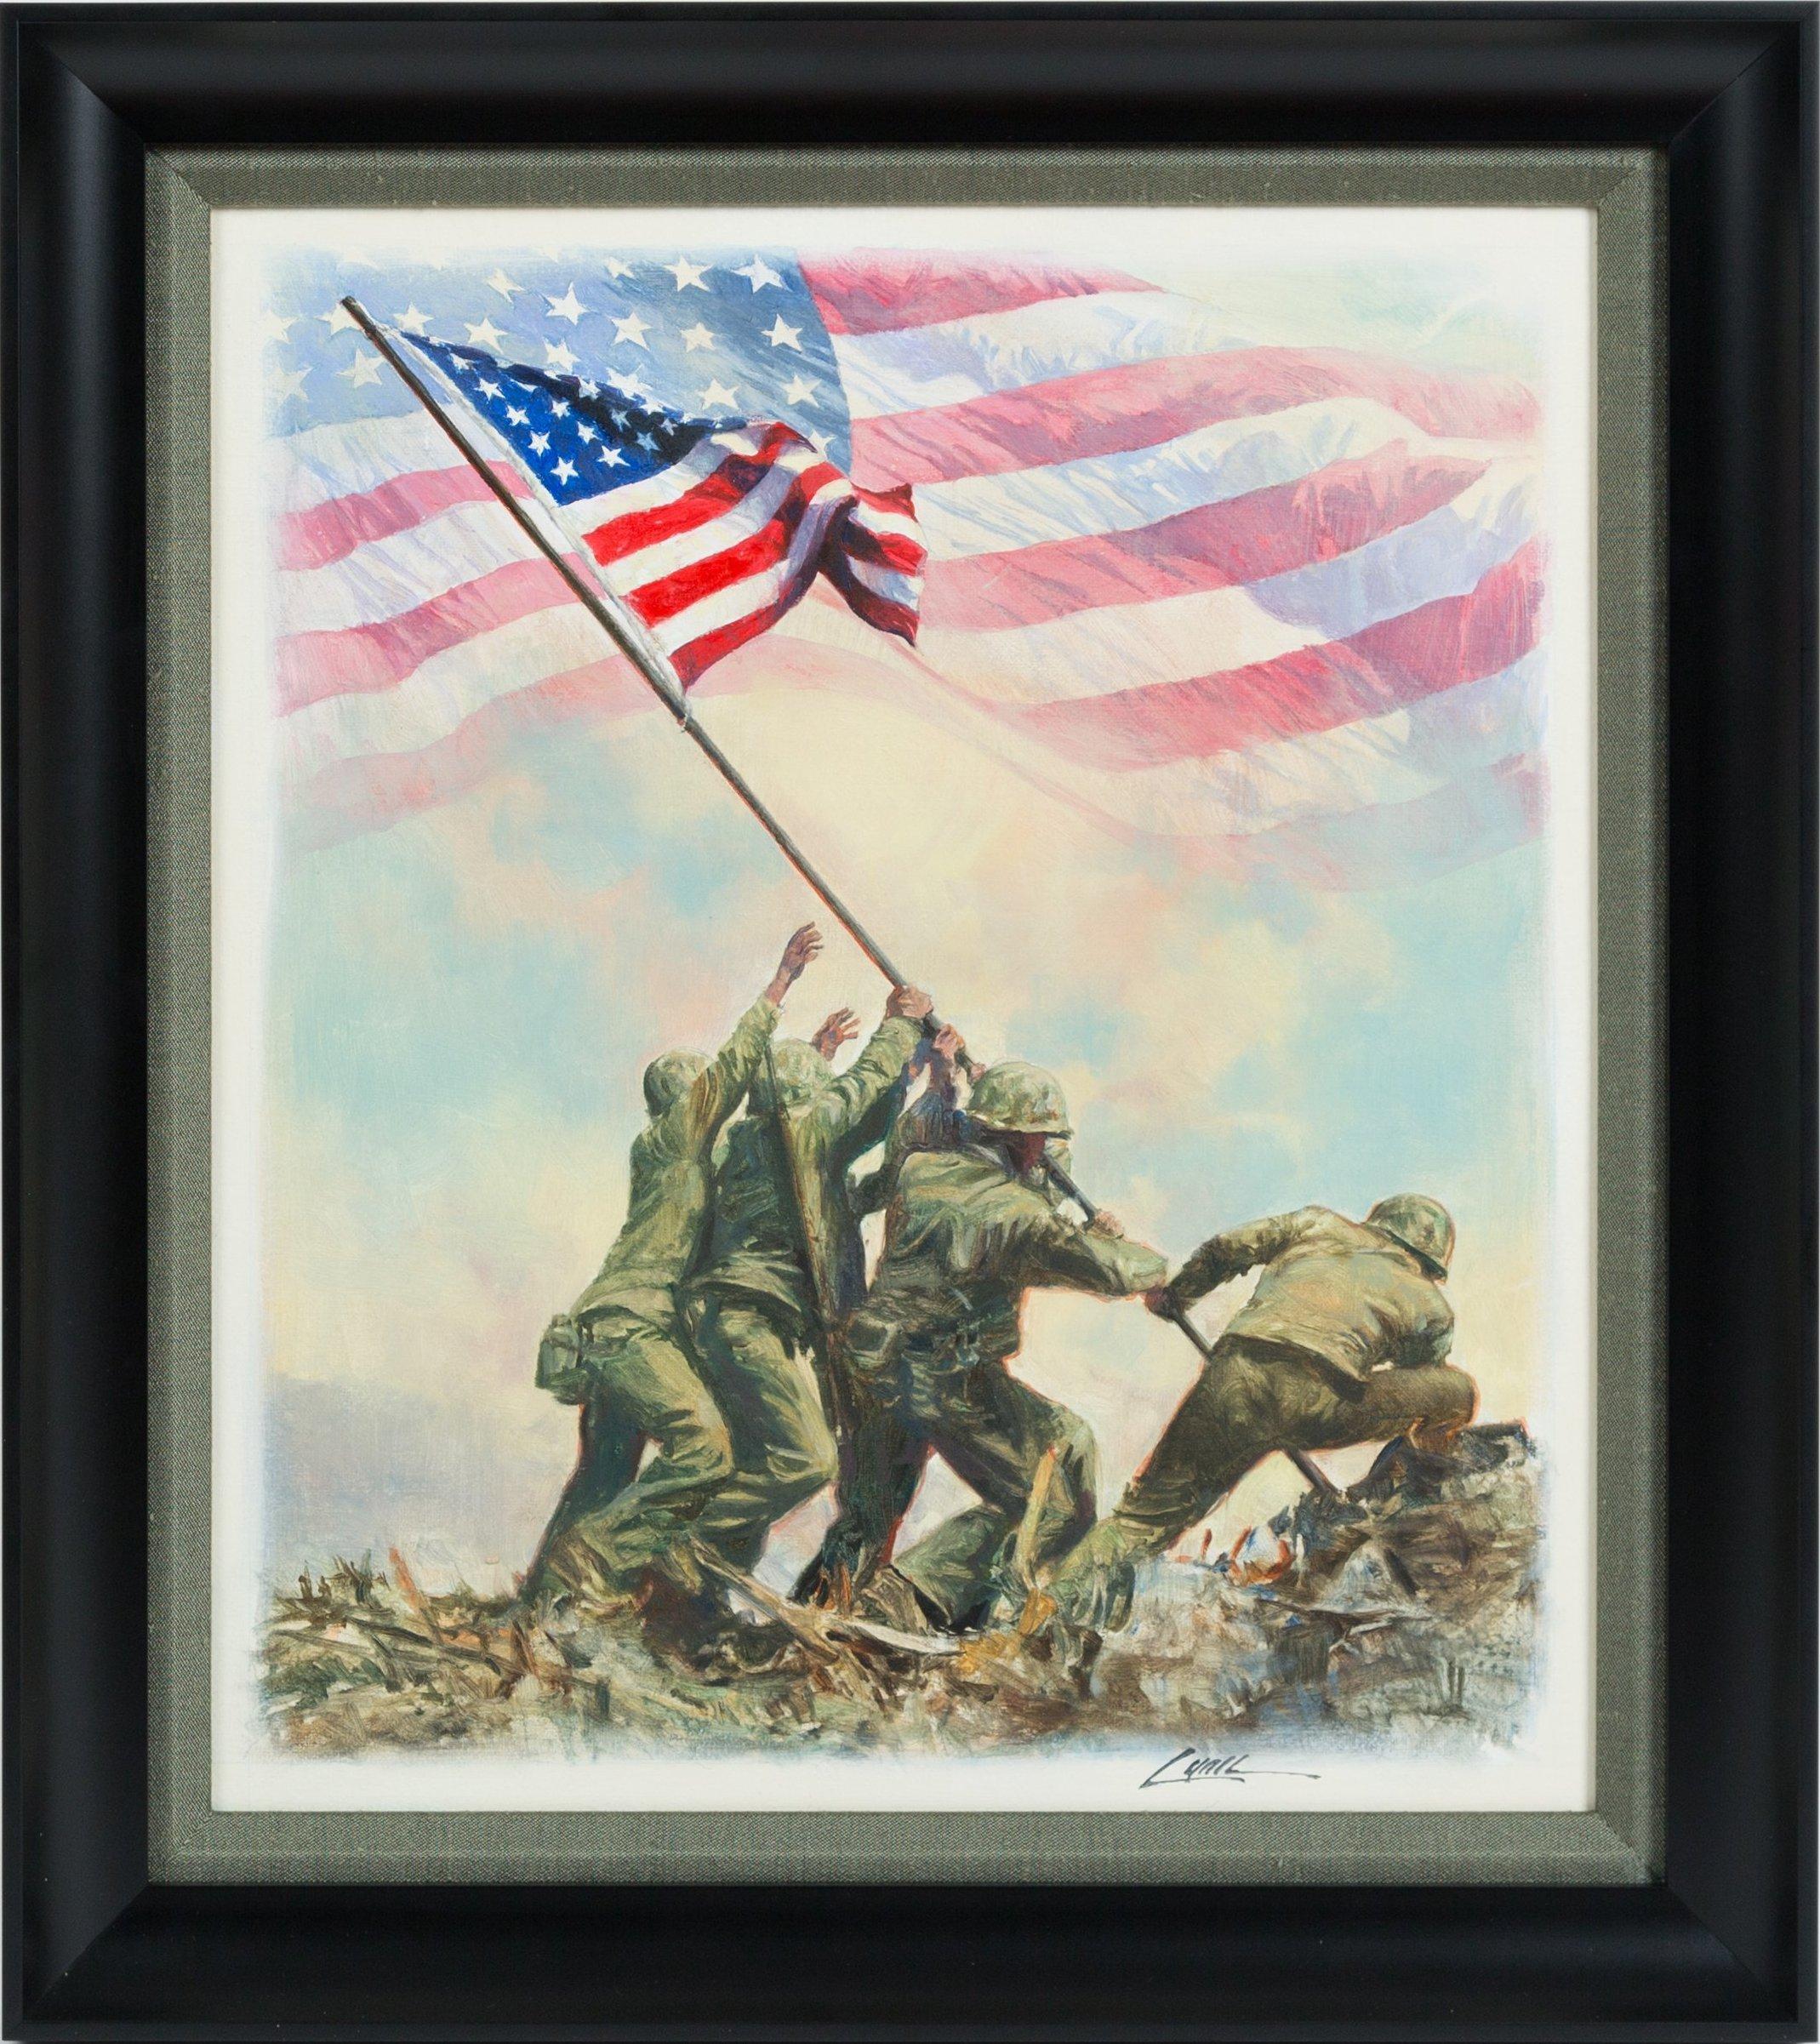 This original oil painting on canvas, entitled Flag Raised at Iwo Jima was painted by Dennis Lyall. The work originally appeared in the Fleetwood Commemorative Cover for Old Glory’s Proudest Moments stamps series published February 23, 2002. Lyall